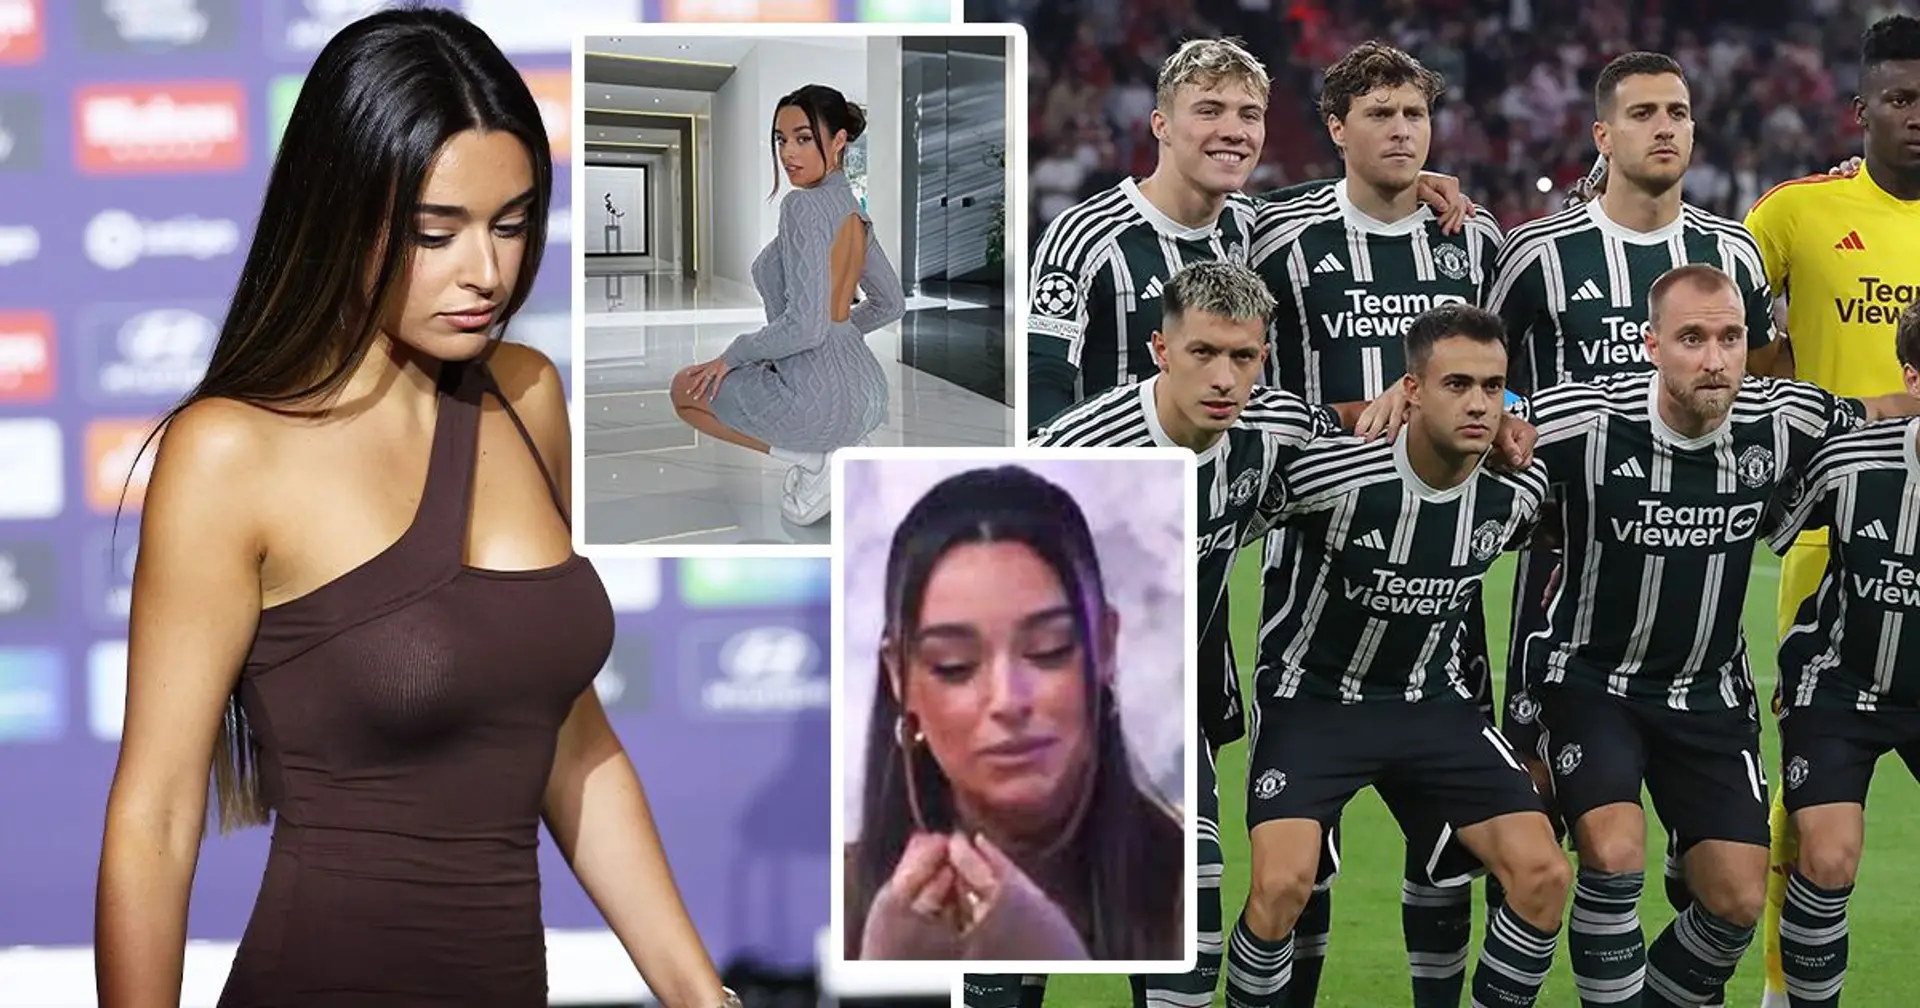 ‘I would say many things to him’: Instagram model breaks down in tears as she confirms her split with Man United player